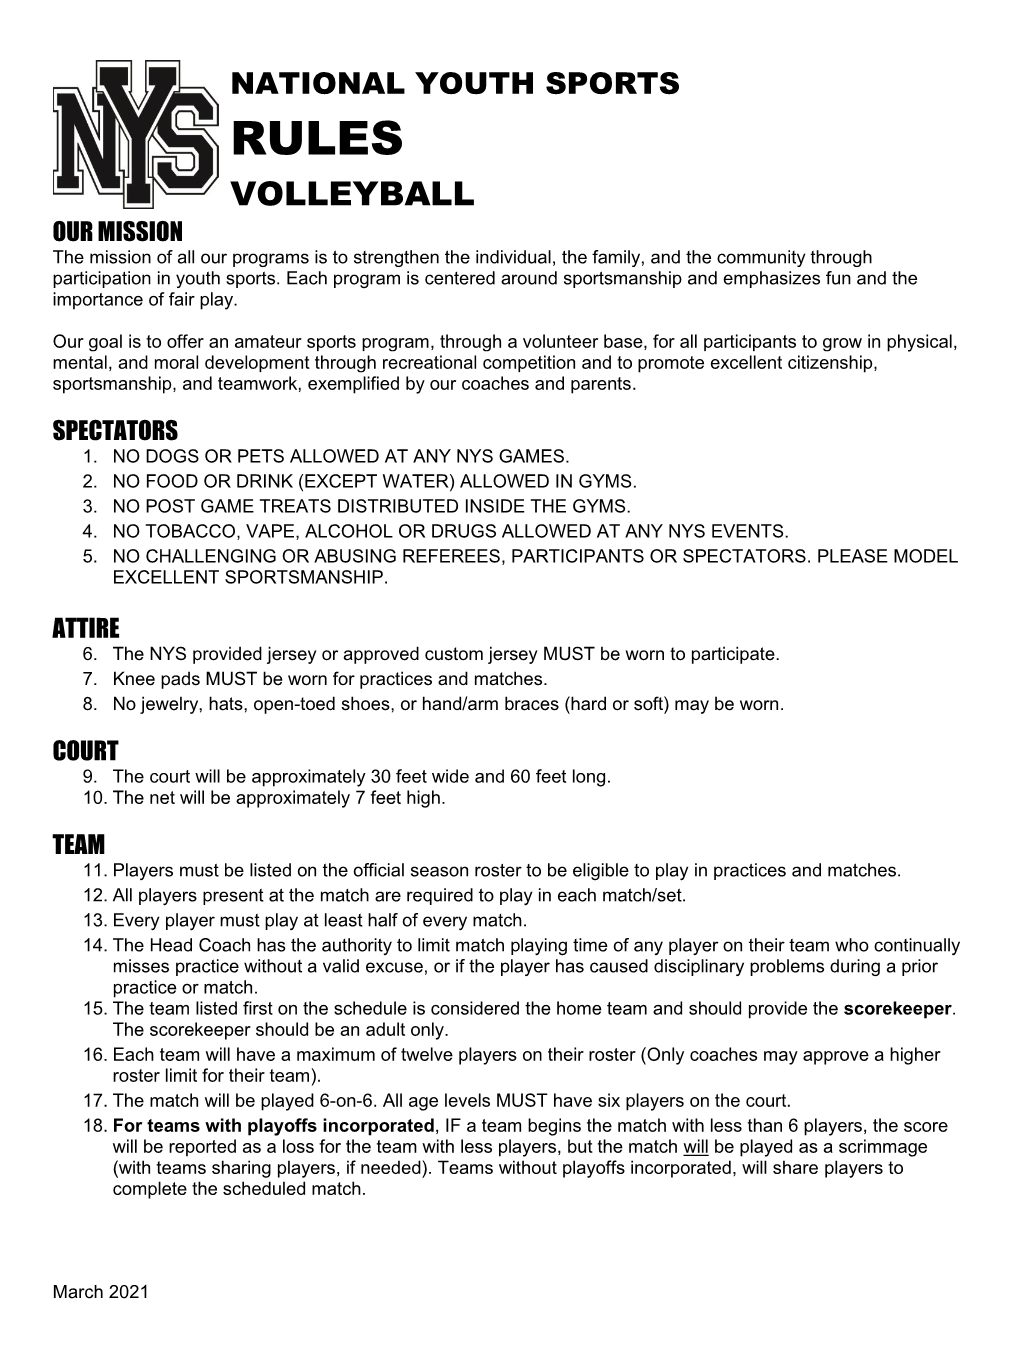 VOLLEYBALL OUR MISSION the Mission of All Our Programs Is to Strengthen the Individual, the Family, and the Community Through Participation in Youth Sports